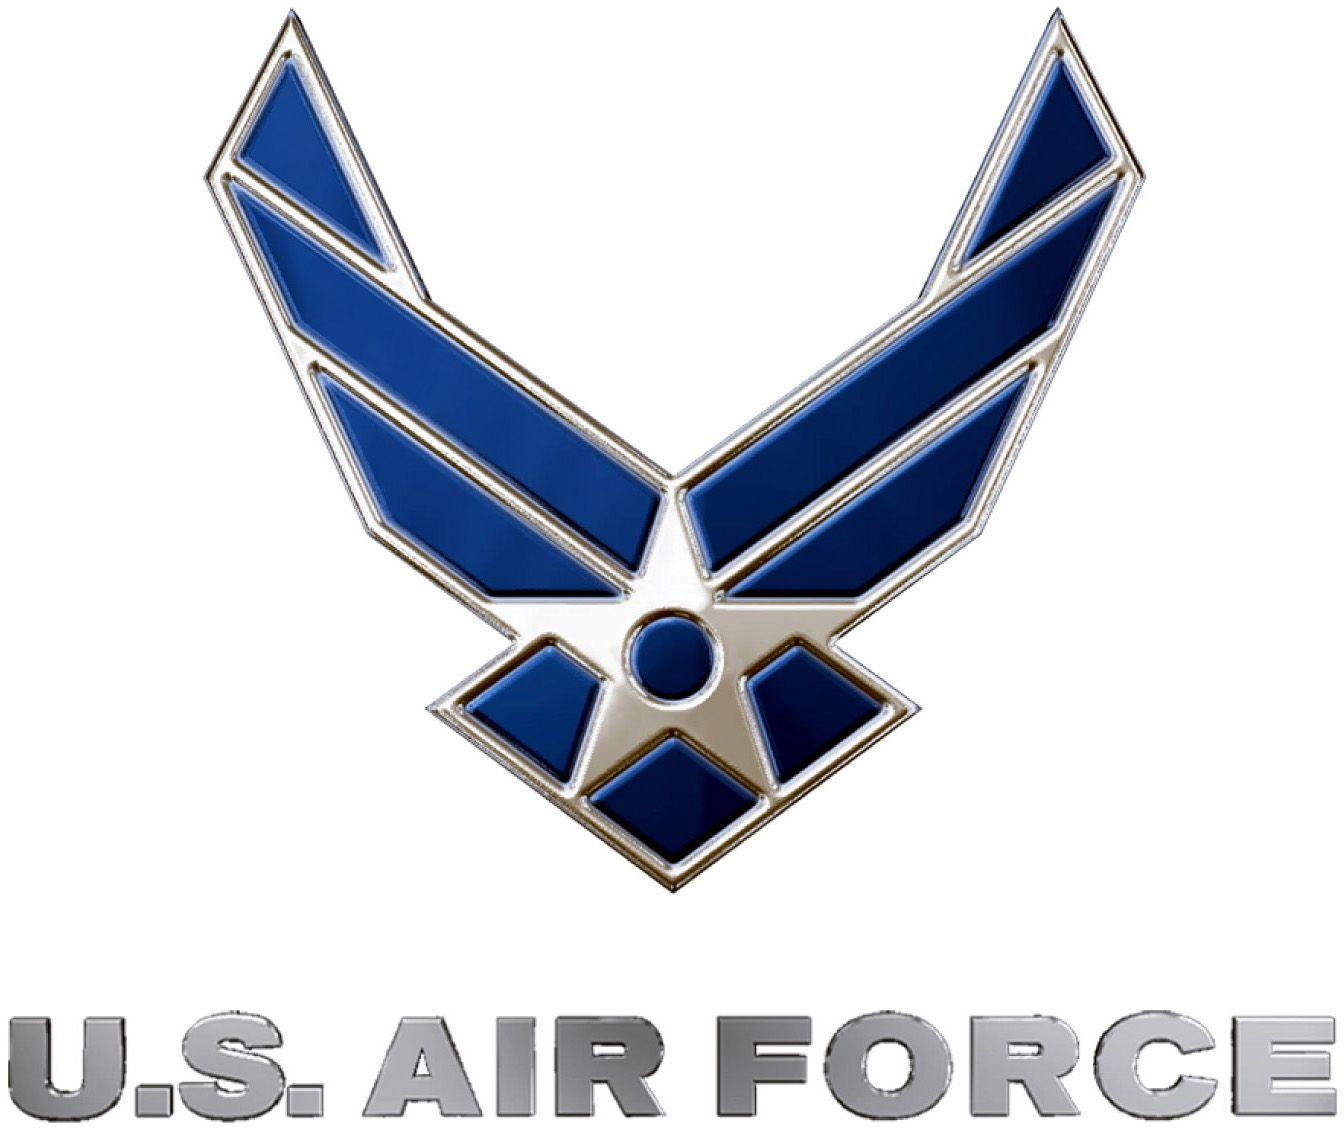 Blue Air Force Logo - United States Air Force logo, blue and